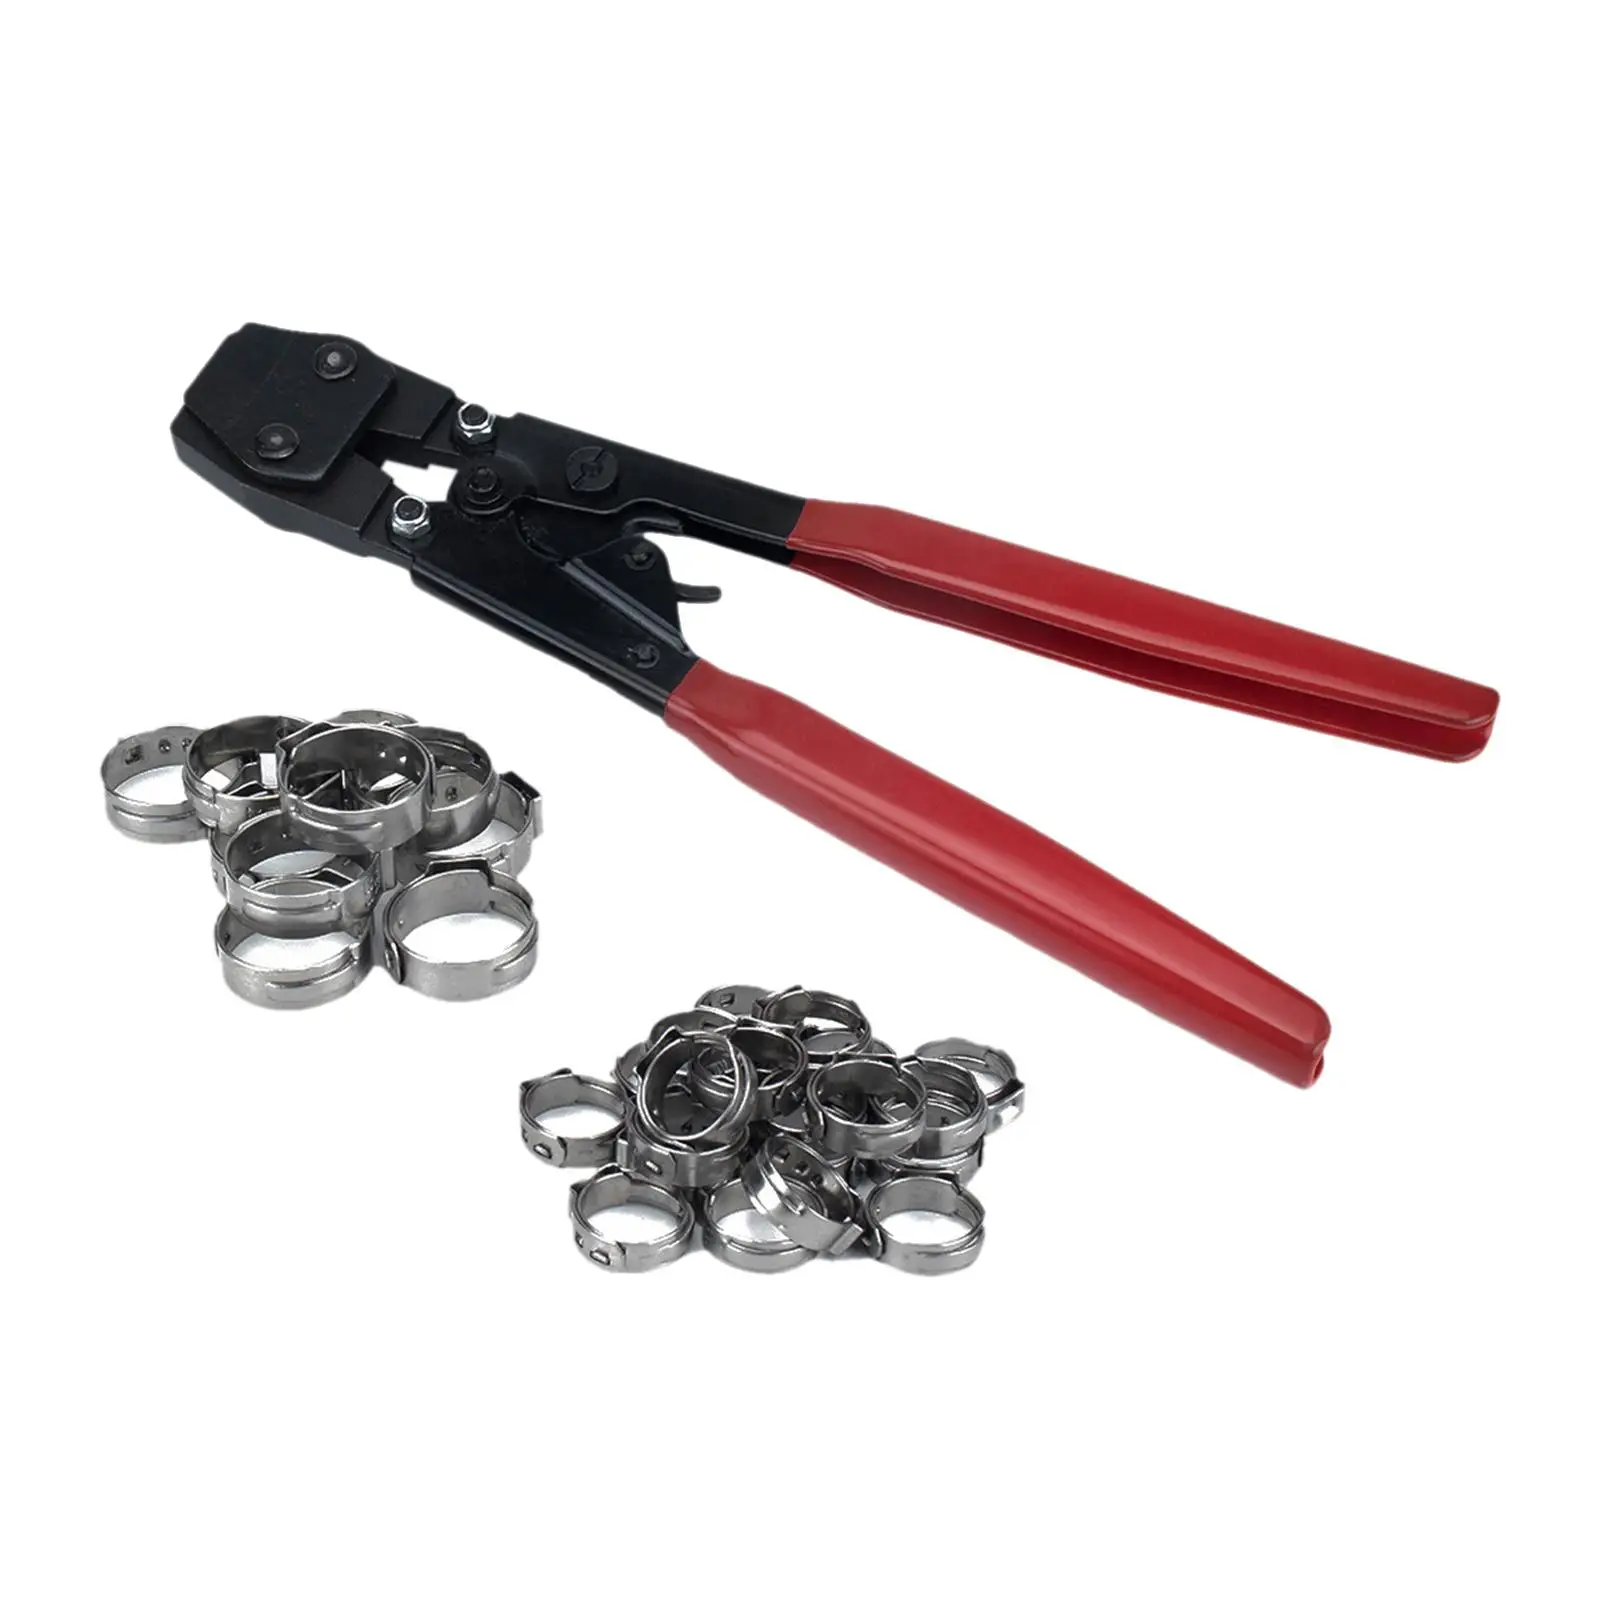 Universal Pex Clamp  Tool Clamp Pliers with Red Rubber Handle Fittings